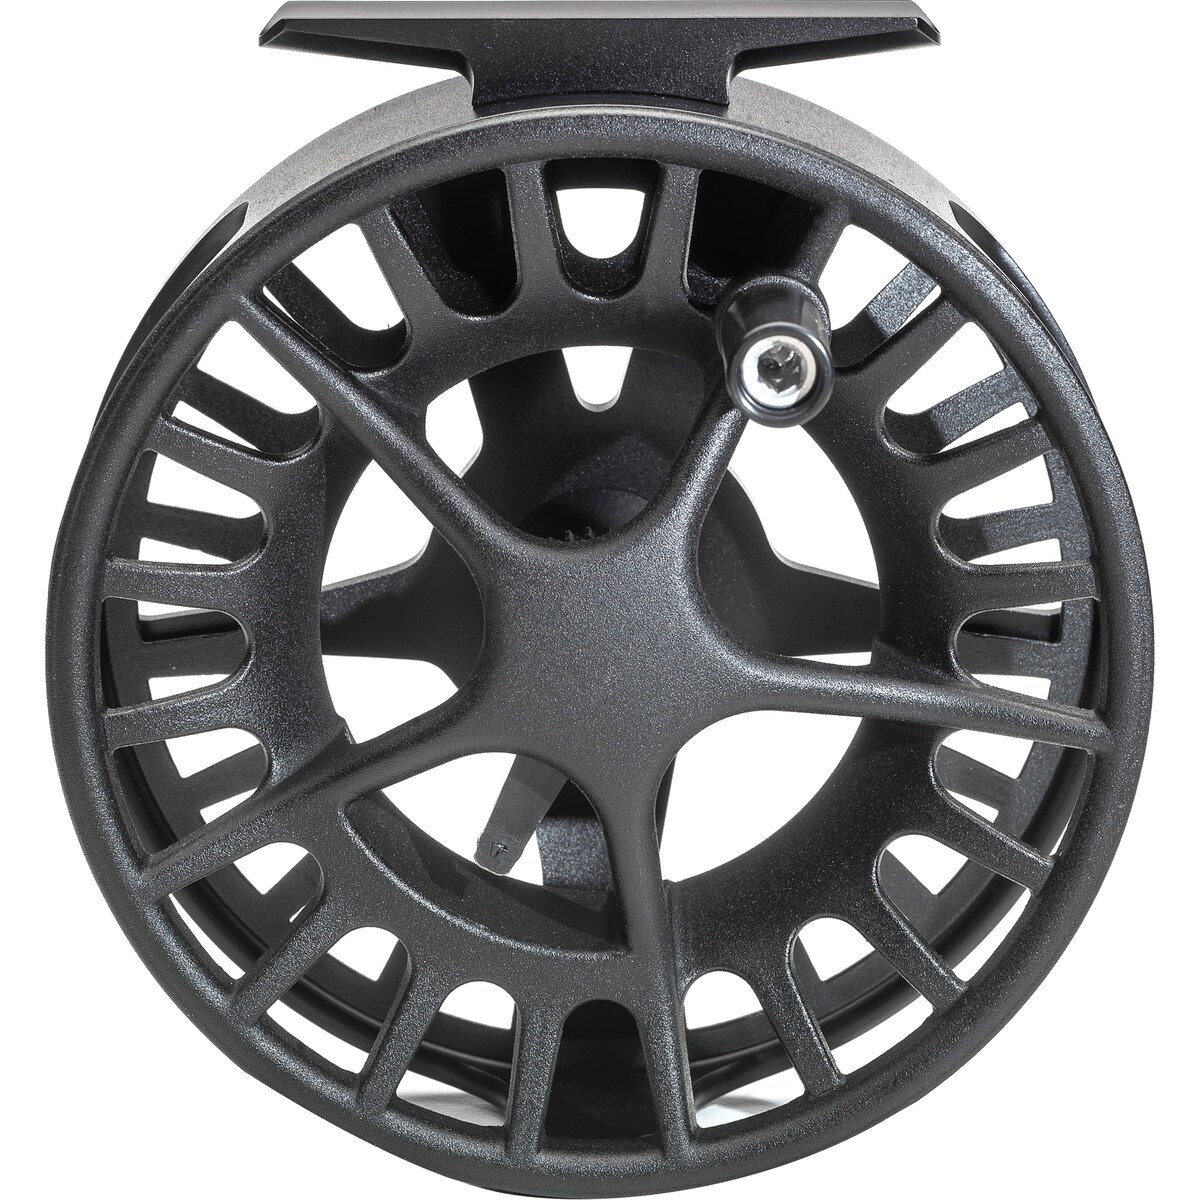 Lamson Remix Fly Reel - Fly Fishing